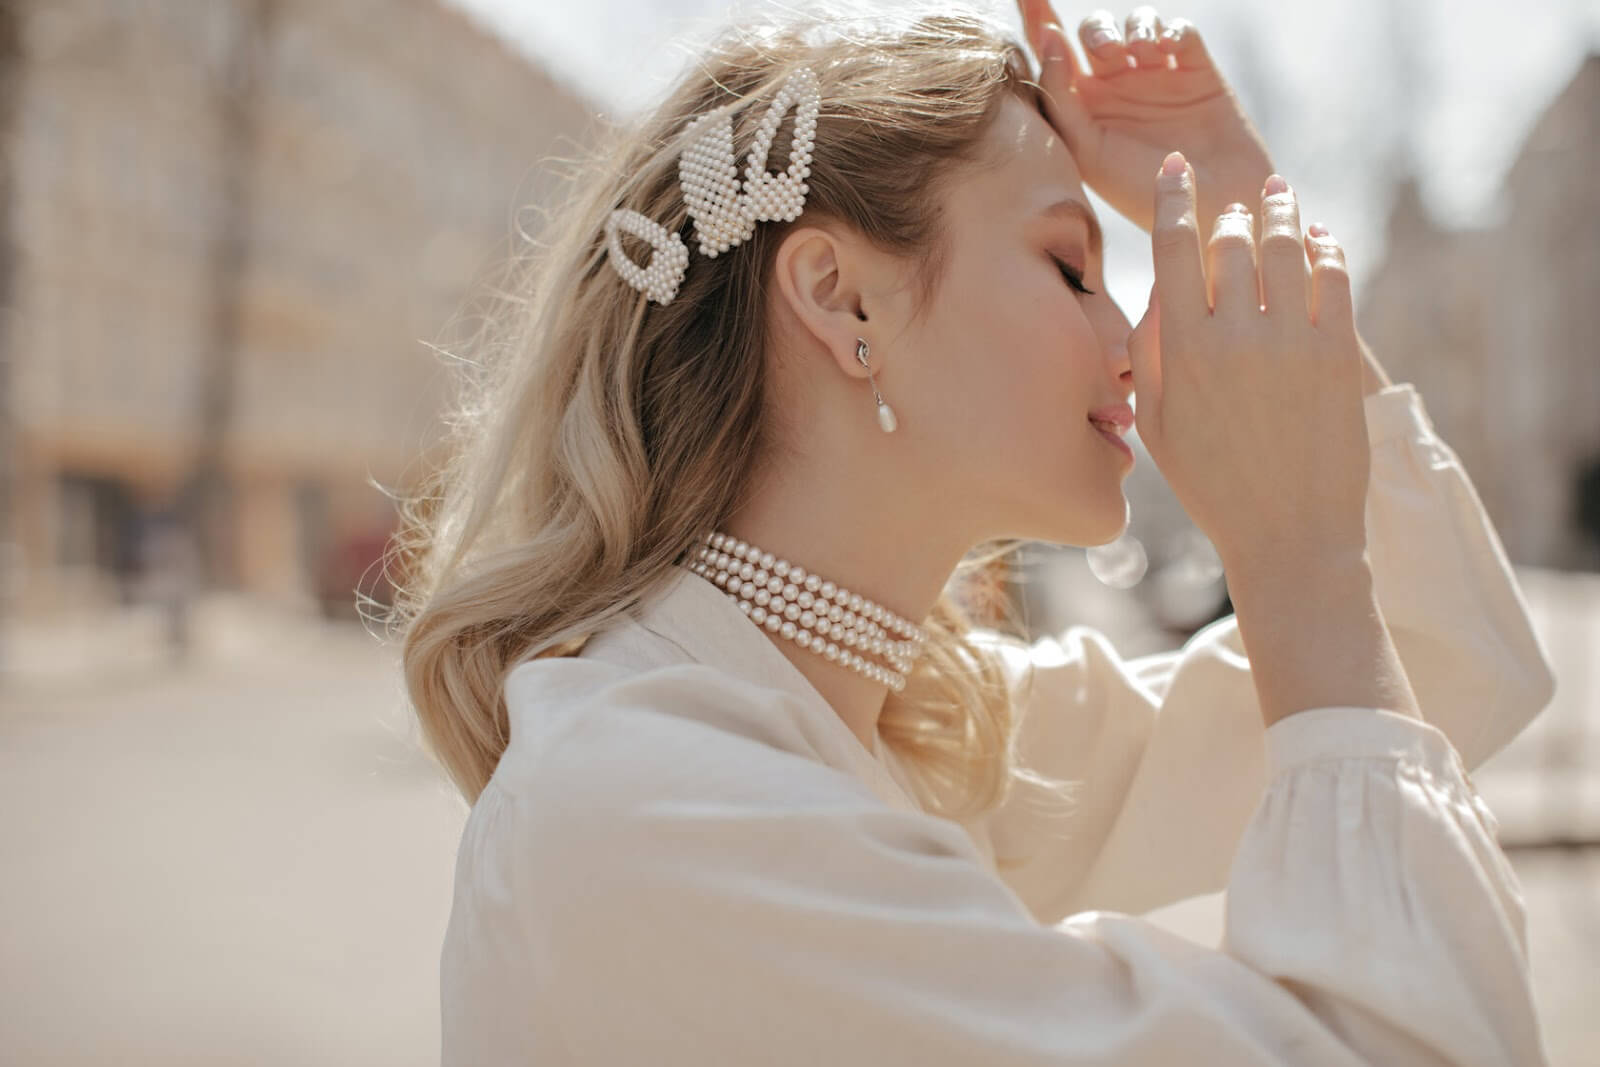 Can you shower with pearl earrings? – Bijoux Caroline Neron